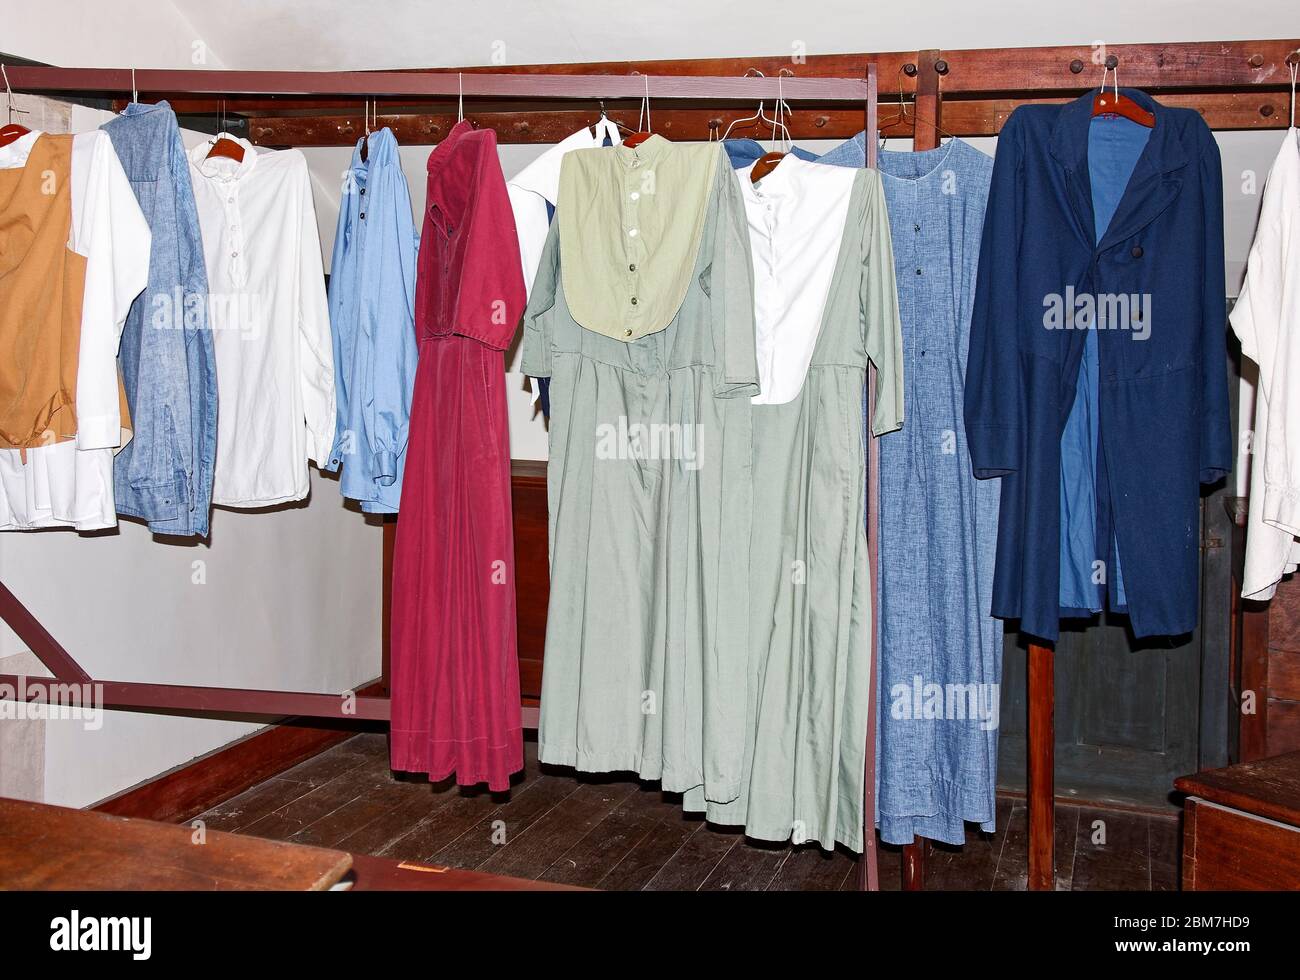 Shaker clothing hanging, plain colors, simple style, Shaker Village of Pleasant Hill, defunct religious community; Kentucky; USA, Harrodsburg; KY Stock Photo